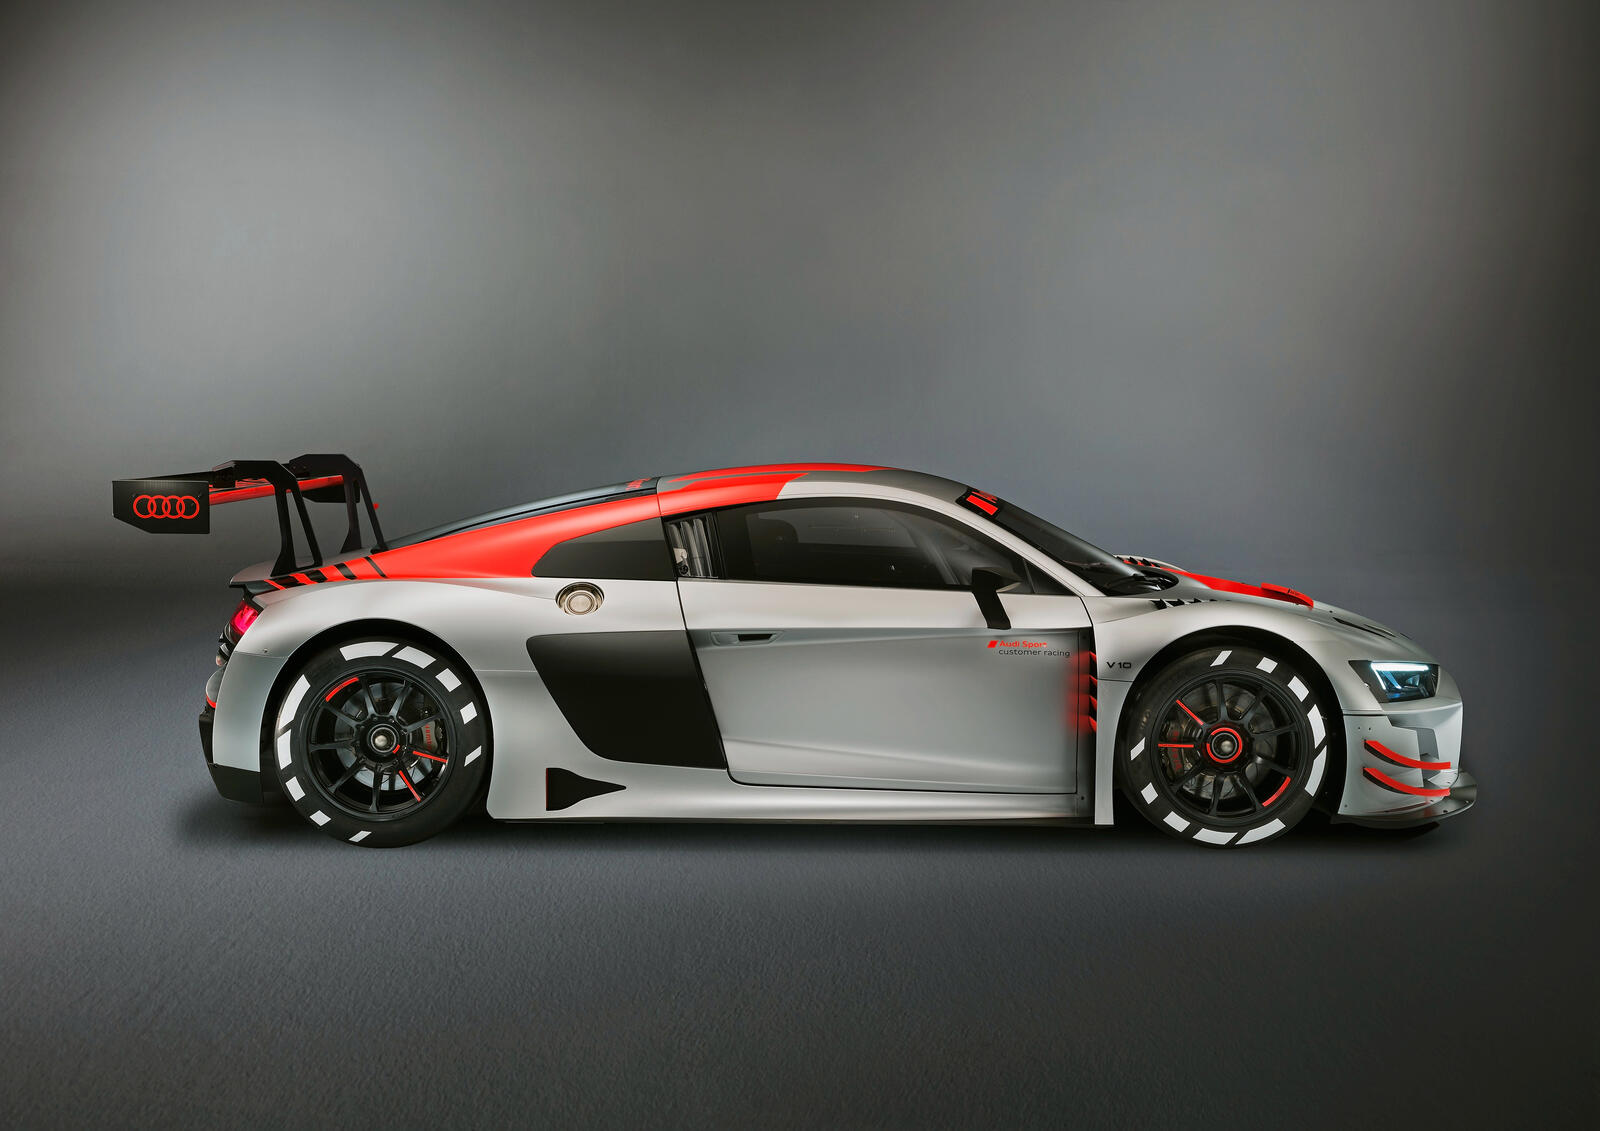 Free photo Audi R8 Lms side view for sketching